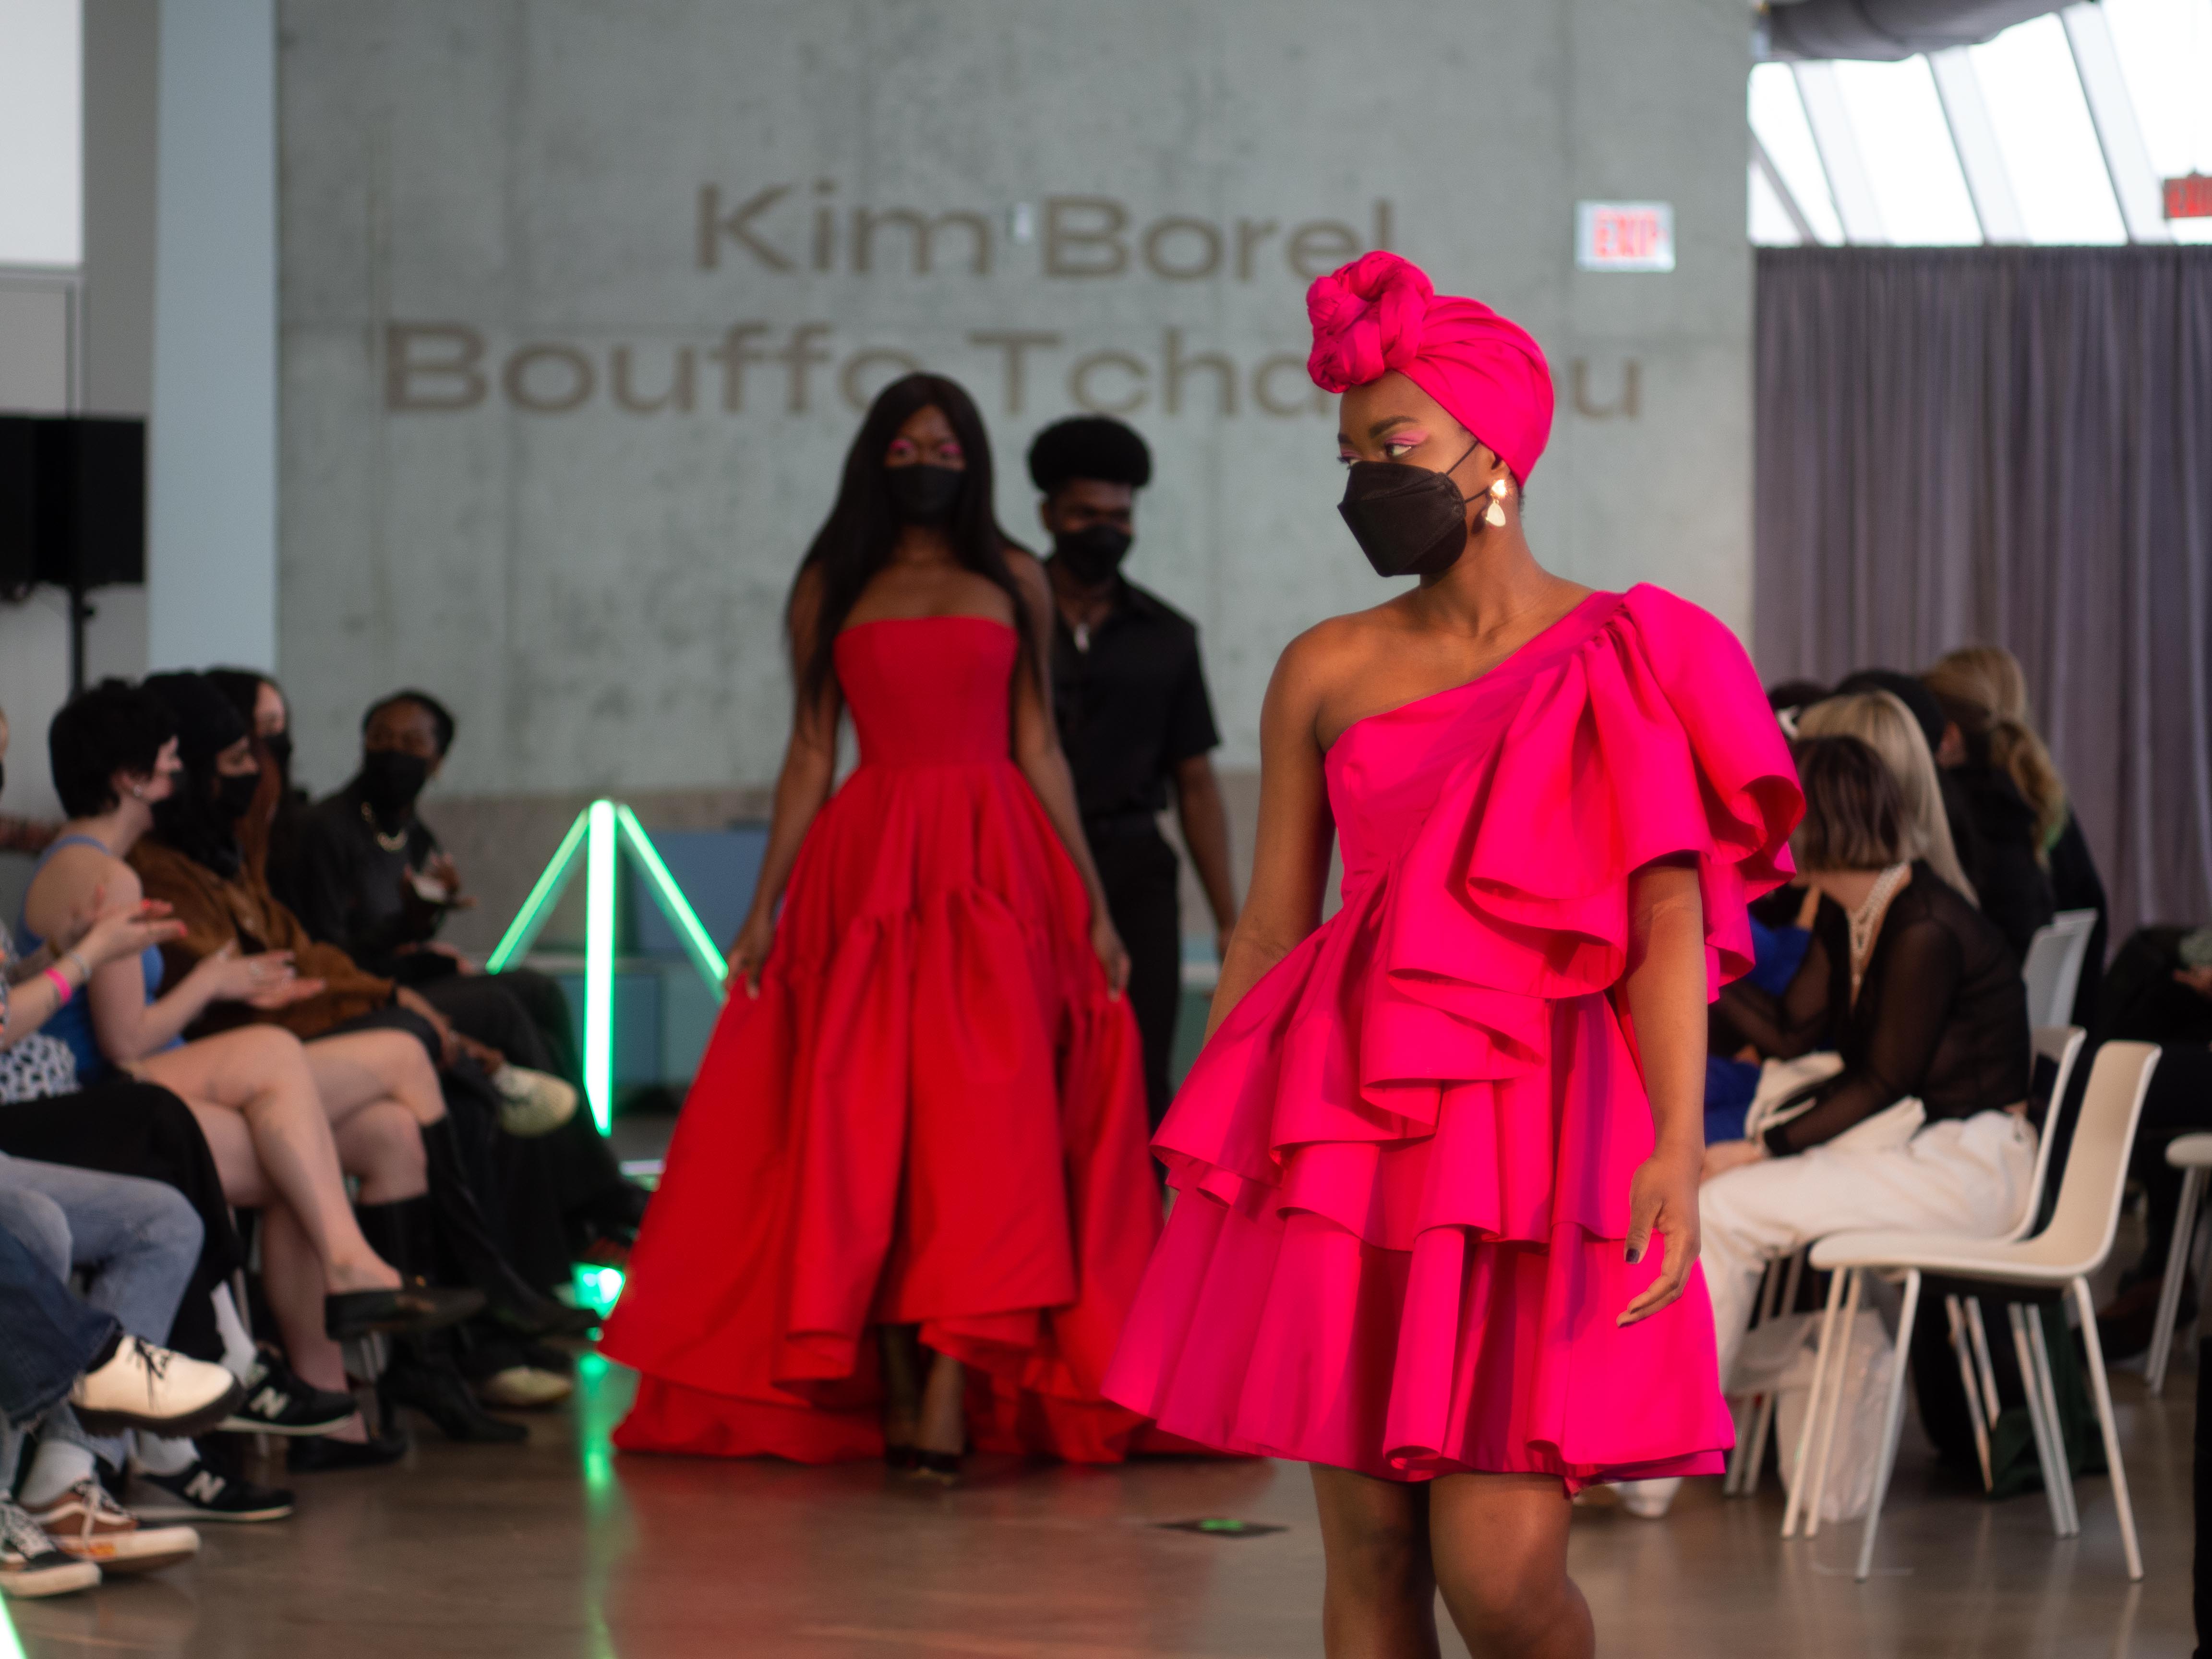 A model on the runway wearing a piece from the collection of Kim Borrell Bouffo Tchamou